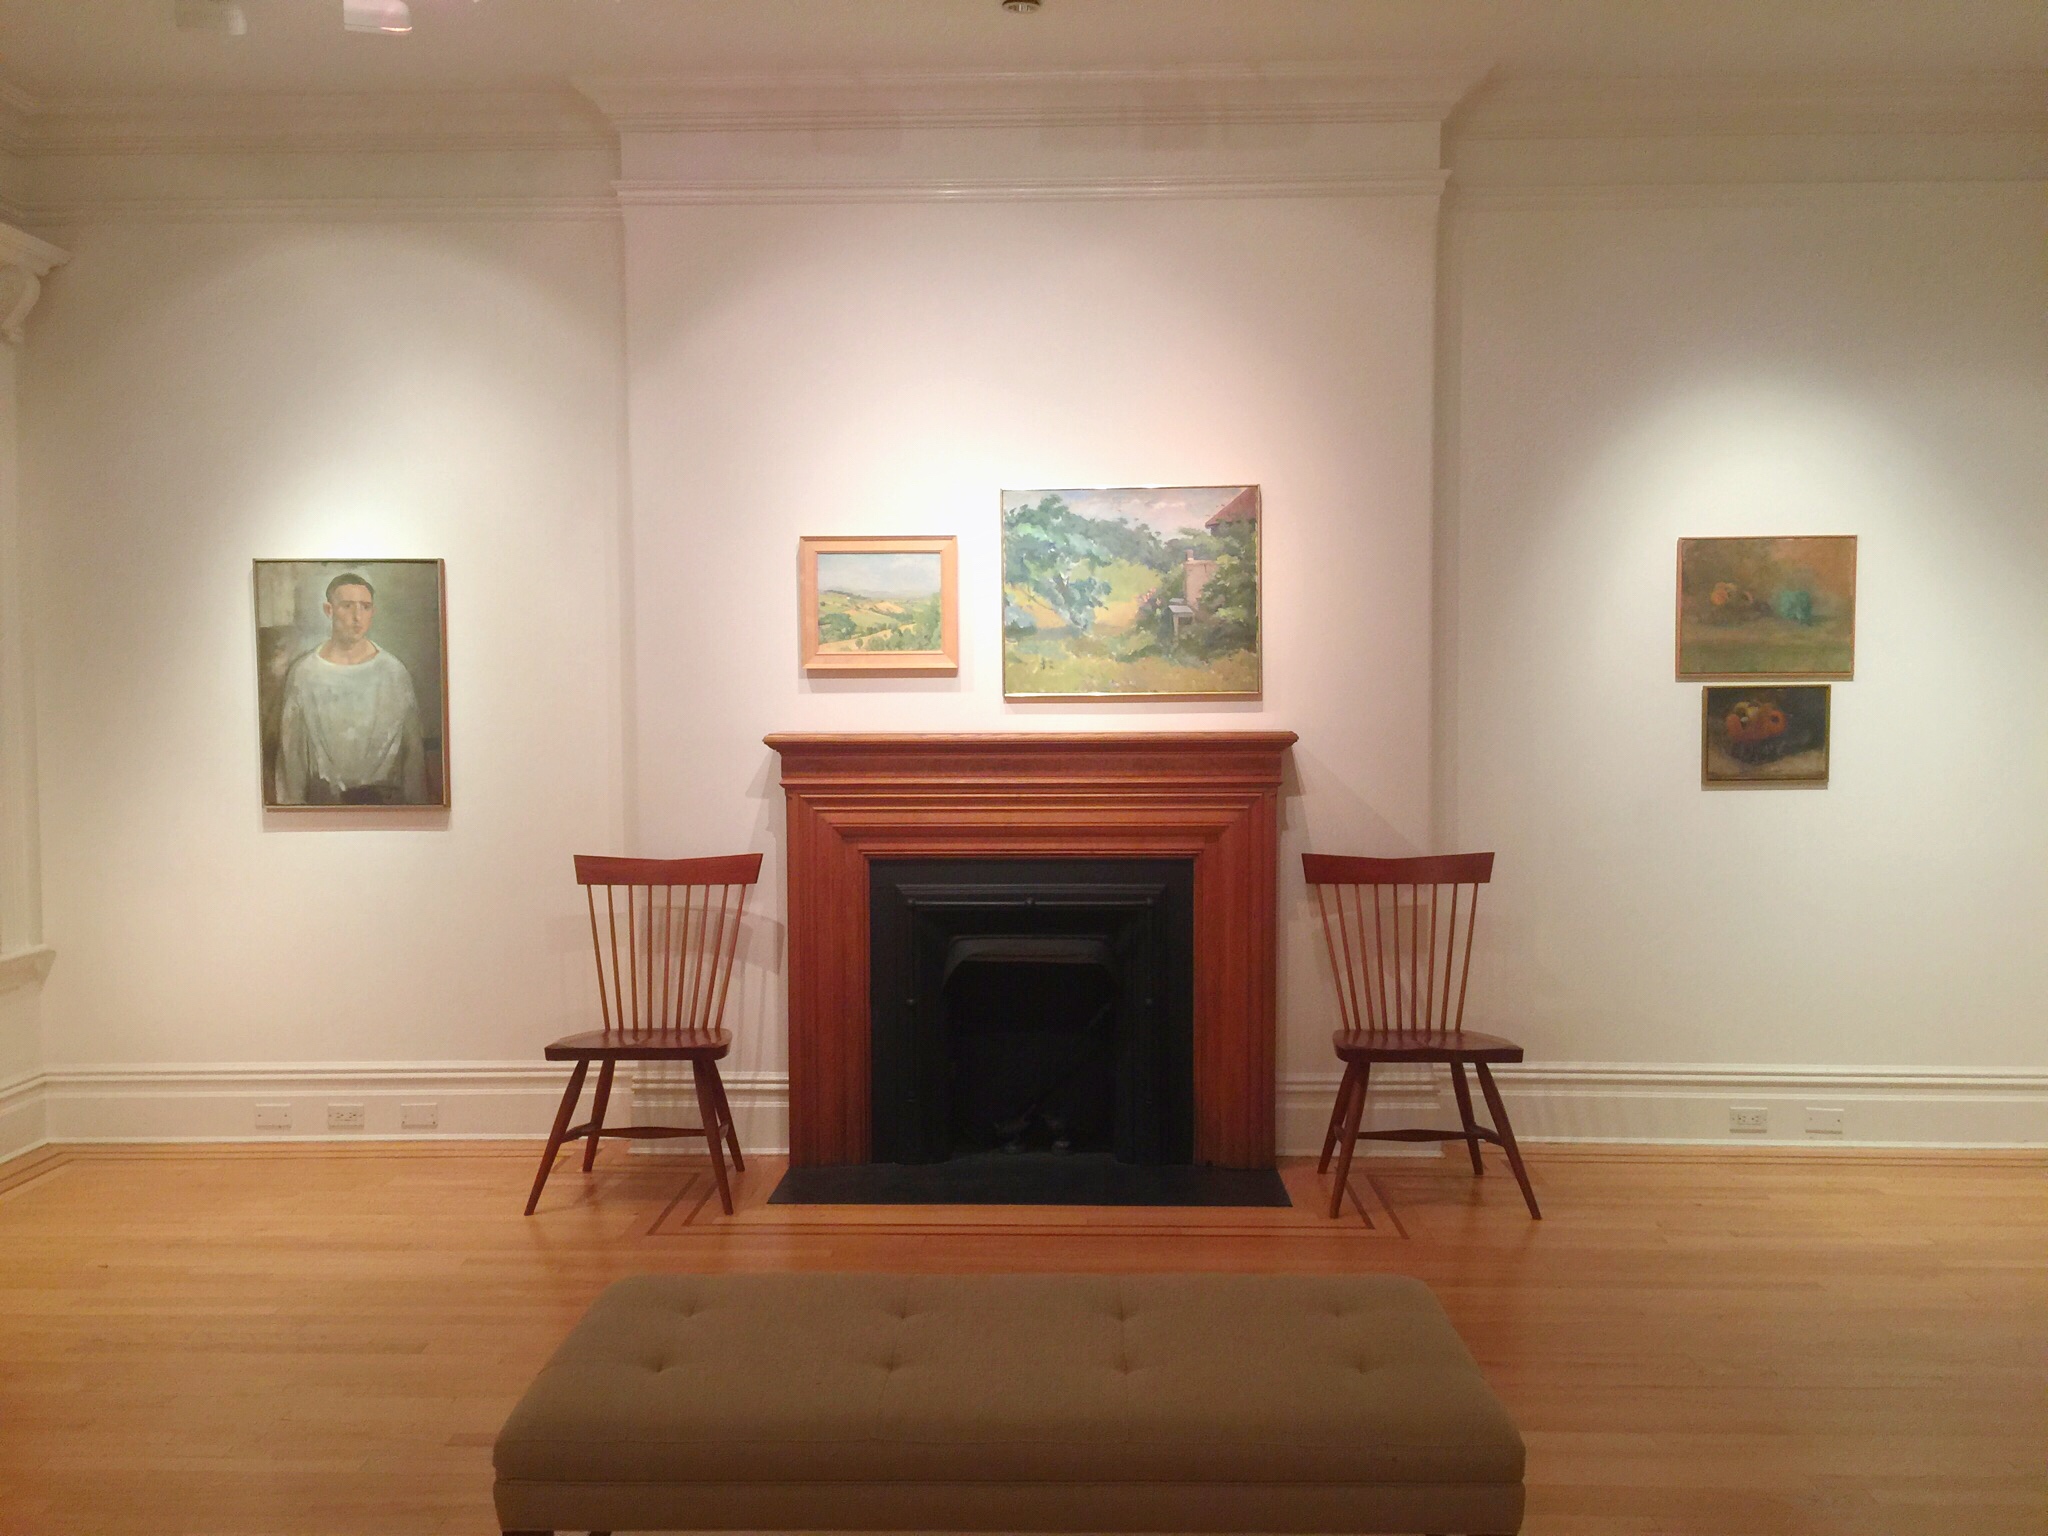 Lennart Anderson, Early and Late Paintings… installed and done.